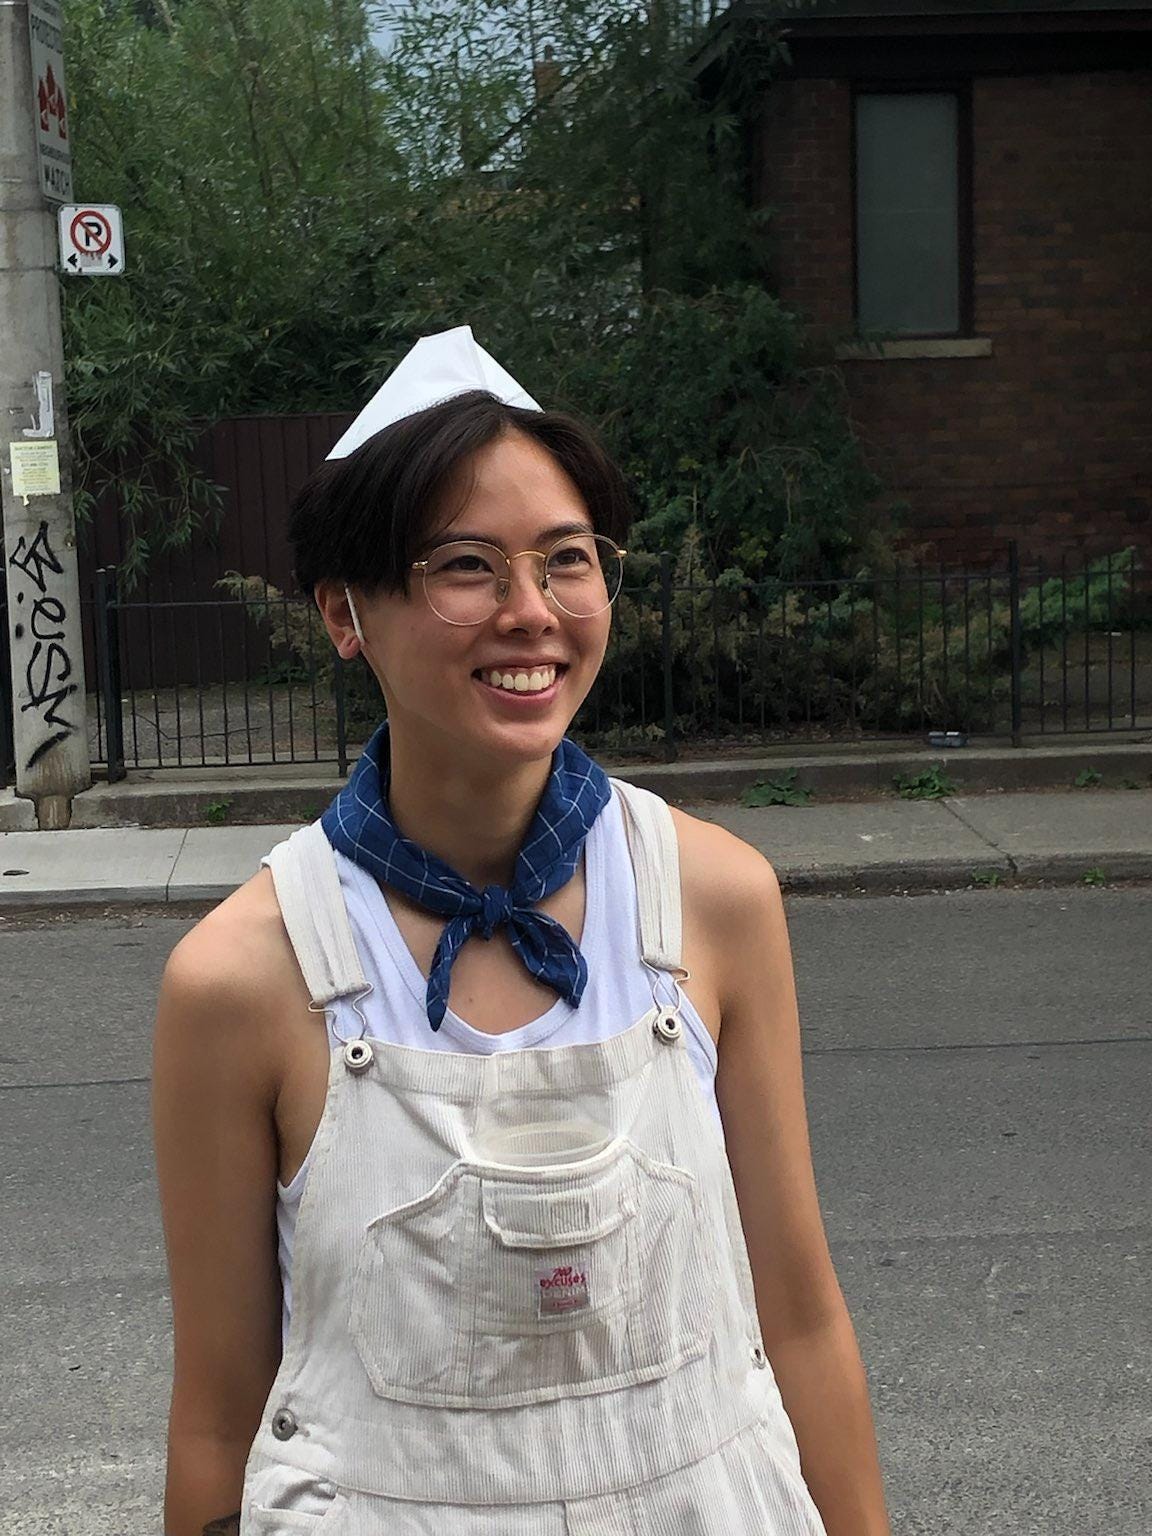 Khanh standing on the street in white overalls, and a blue bandana around their neck. They are wearing a KN95 mask on their head and smiling to their friend just off camera